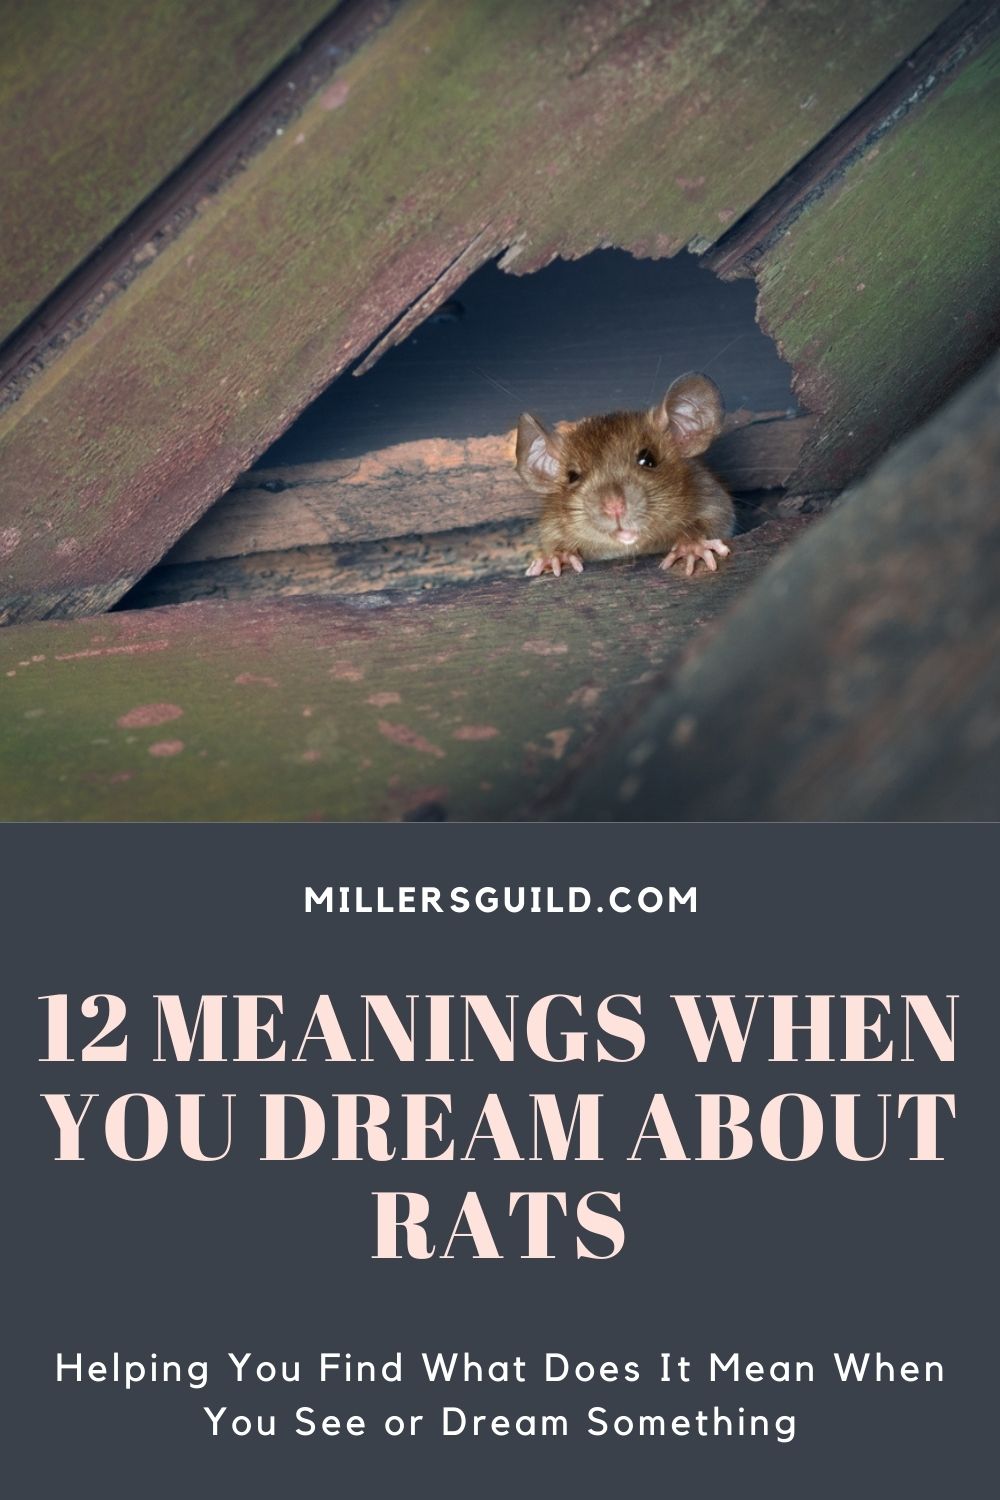 12 Meanings When You Dream About Rats